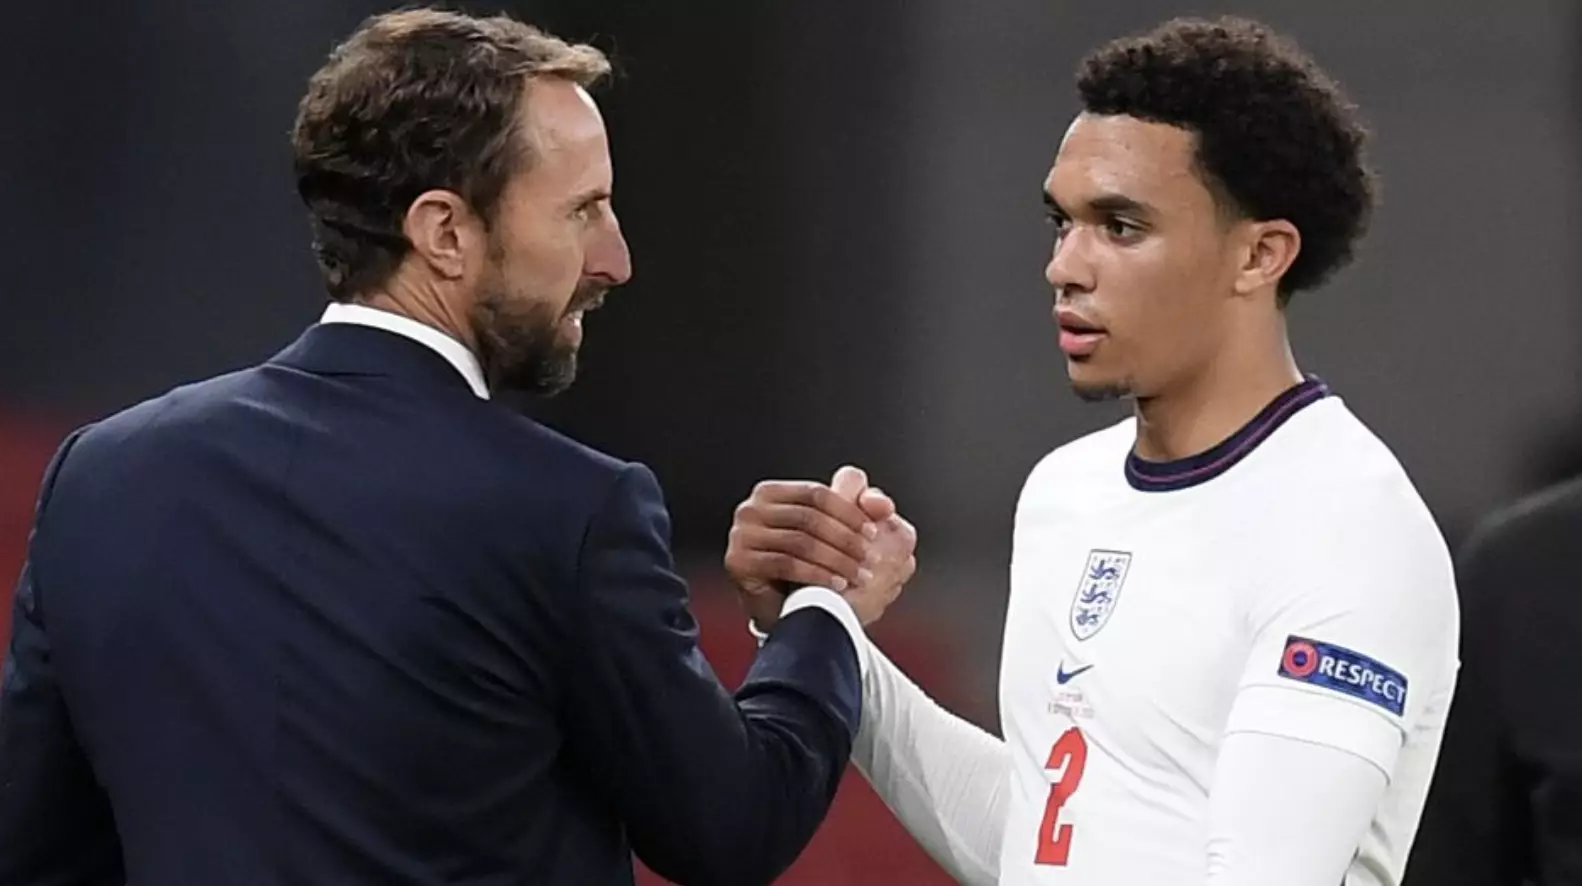 There remains intense speculation as to whether Liverpool's Trent Alexander-Arnold will make the cut